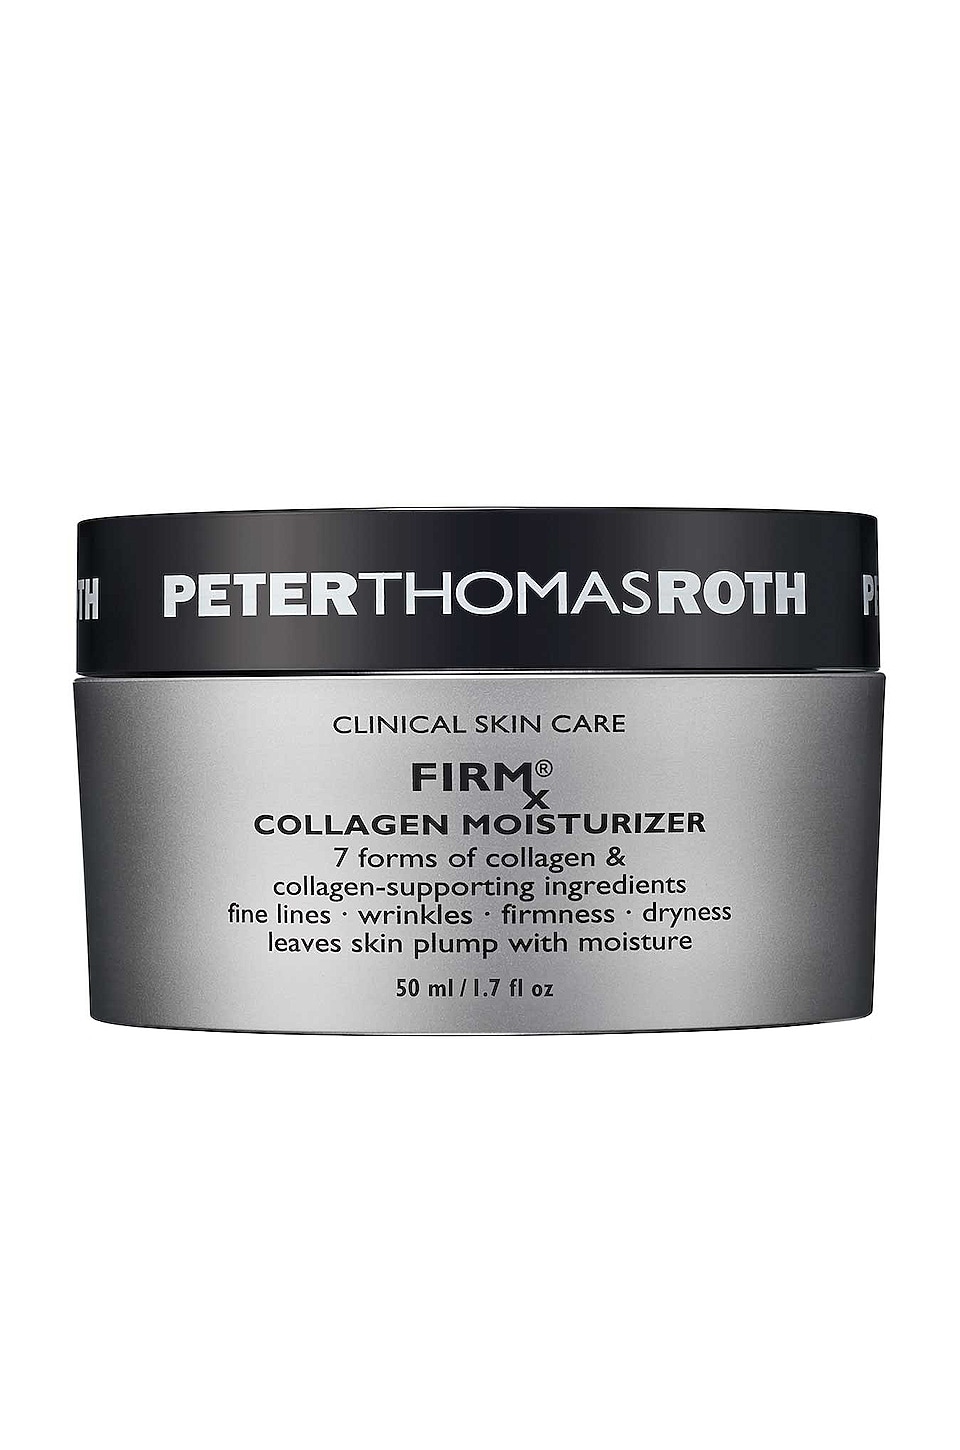 Shop Peter Thomas Roth Firmx Collagen Moisturizer In N,a